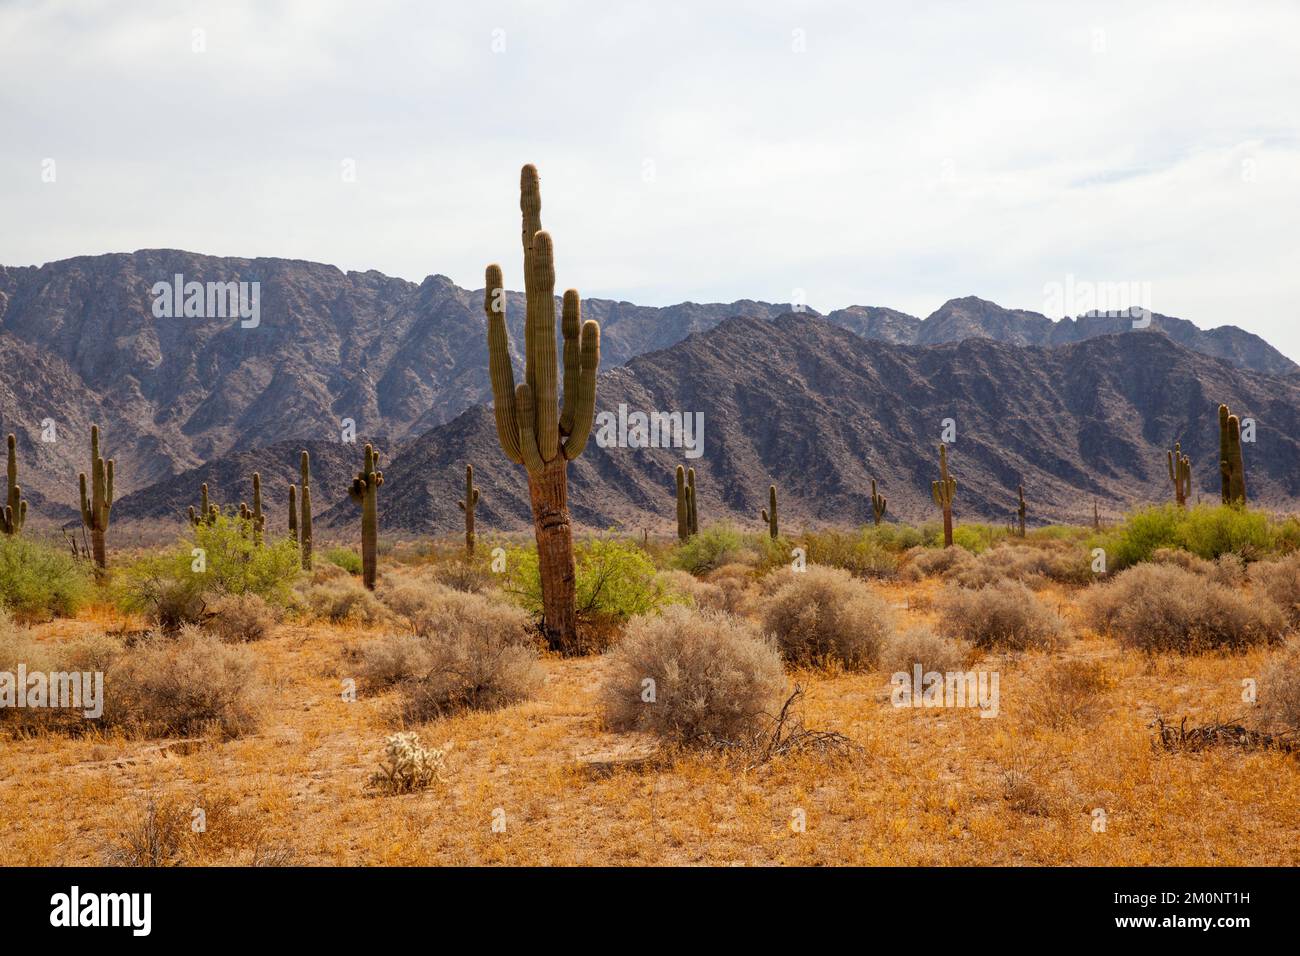 Giant cactus forest in Sonora desert Stock Photo